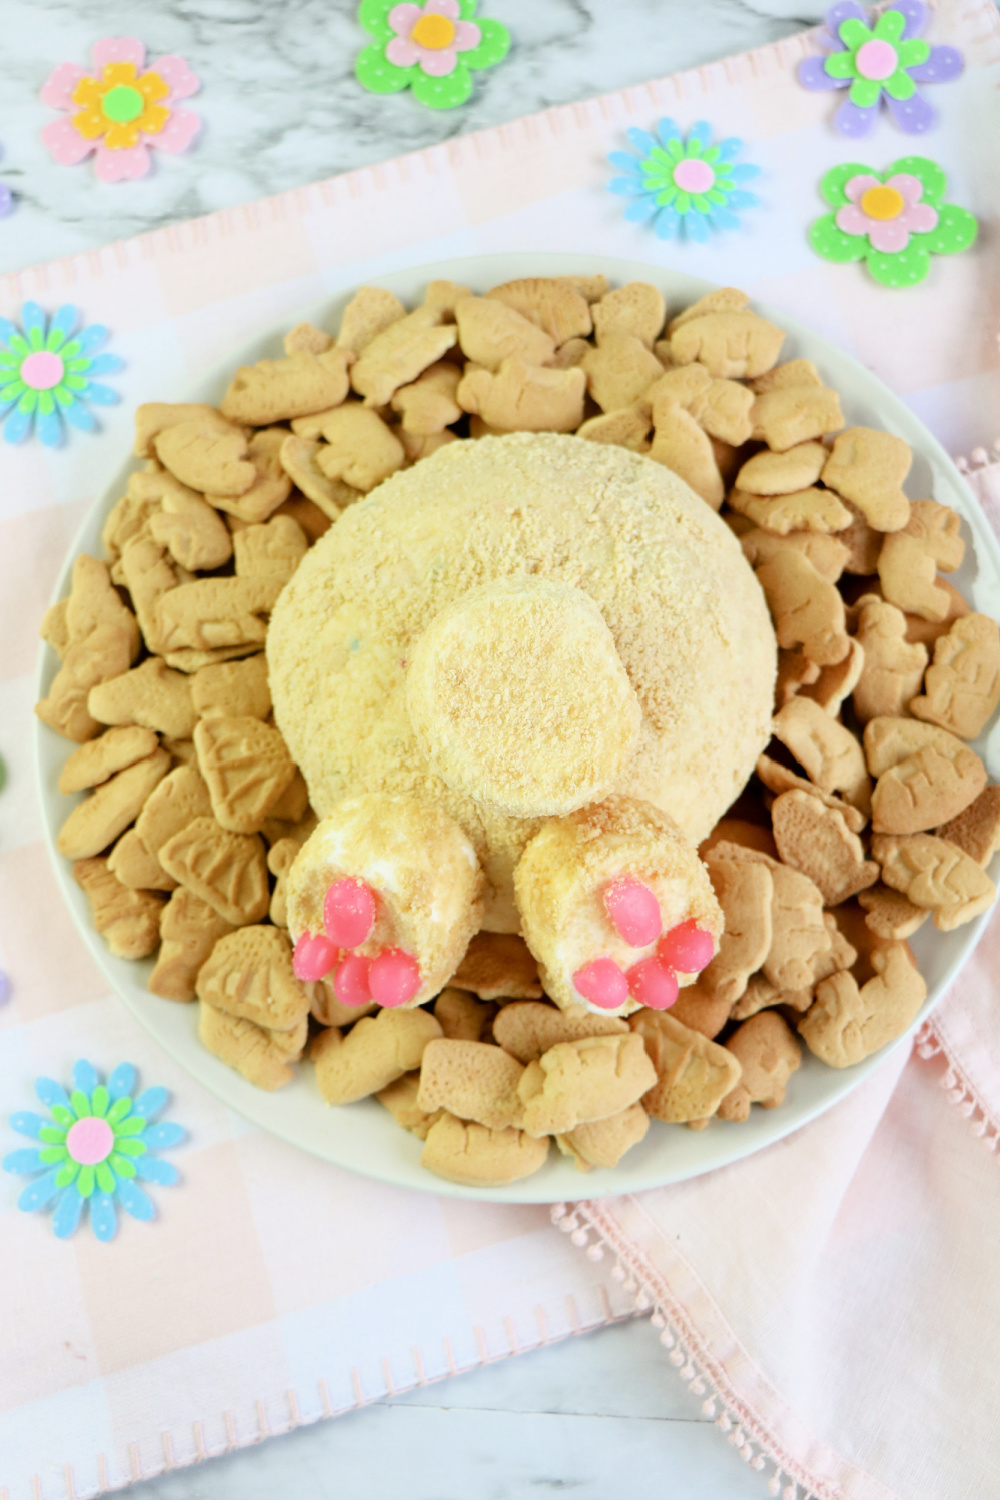 Bunny Butt Funfetti shaped Cheese Ball on a plate with small cookies